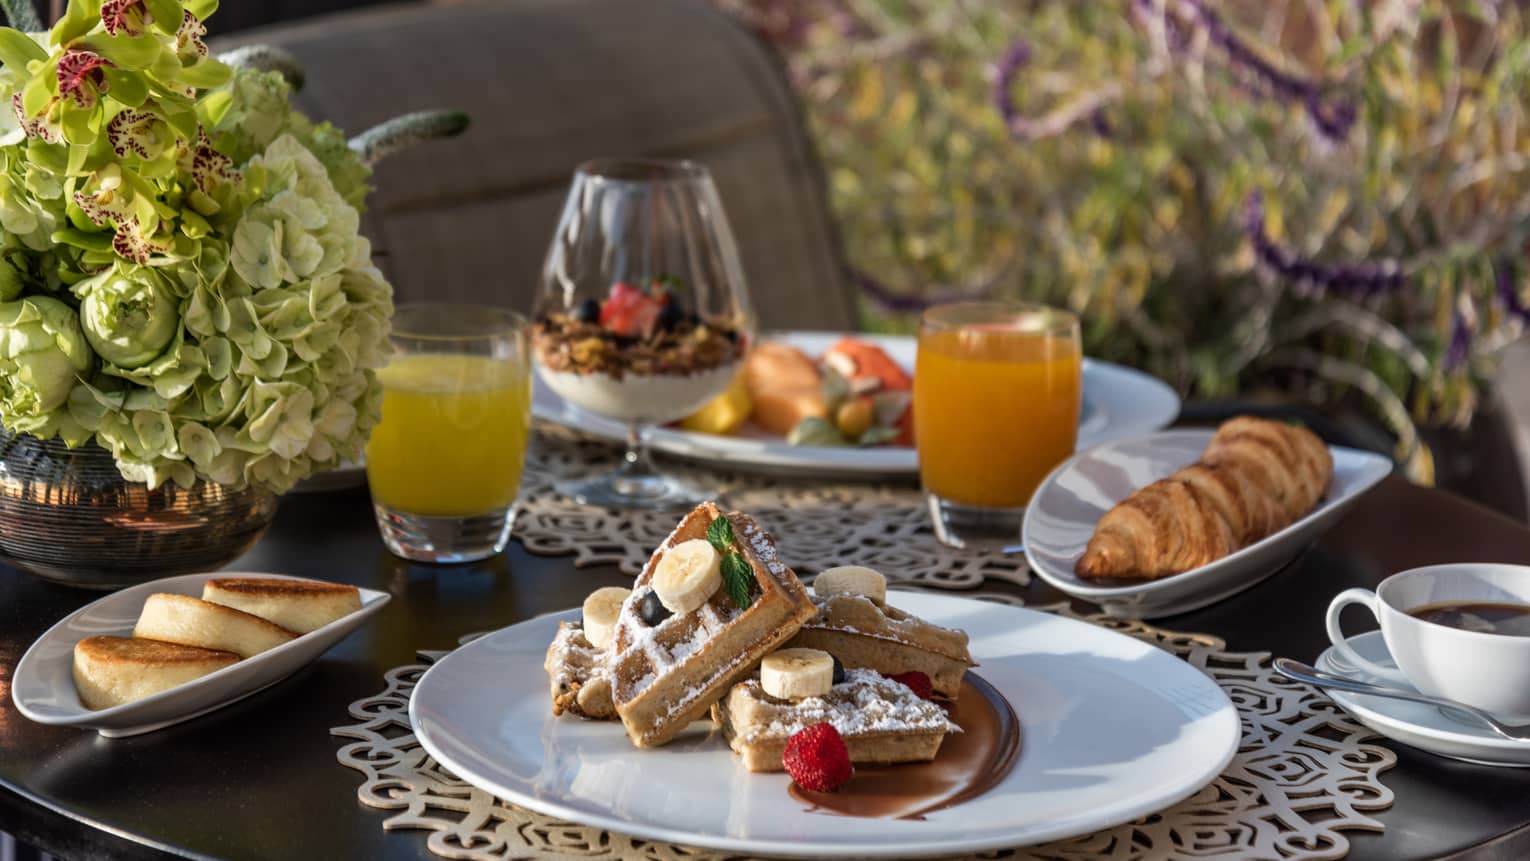 A table filled with breakfast items including sliced waffles topped with fruit, a croissant, two cups of juice, cup of coffee and a glass of yogurt parfait